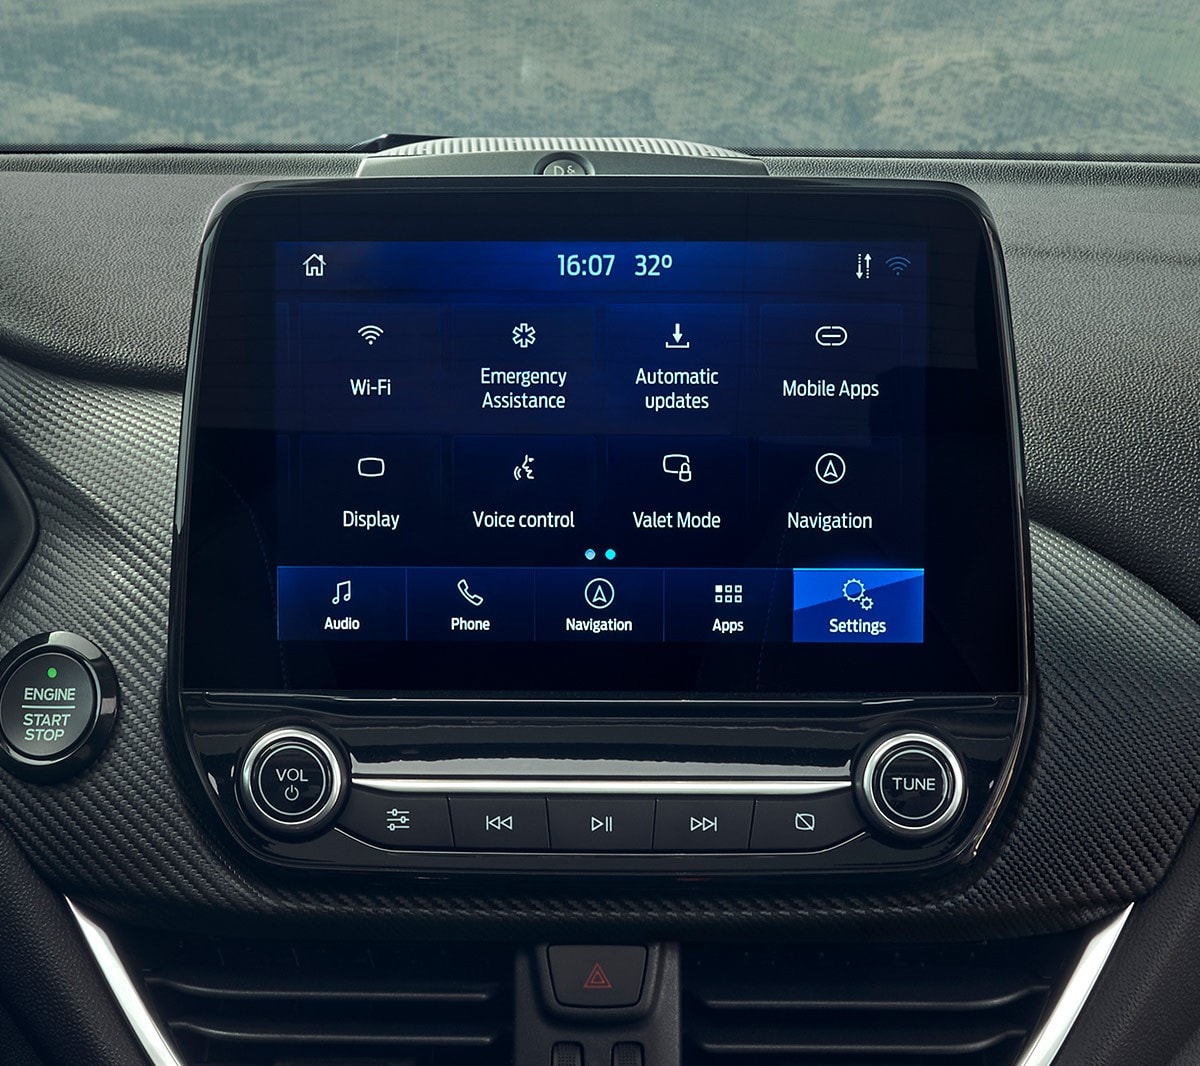 Ford Fiesta interior SYNC 3.2 touchscreen close up